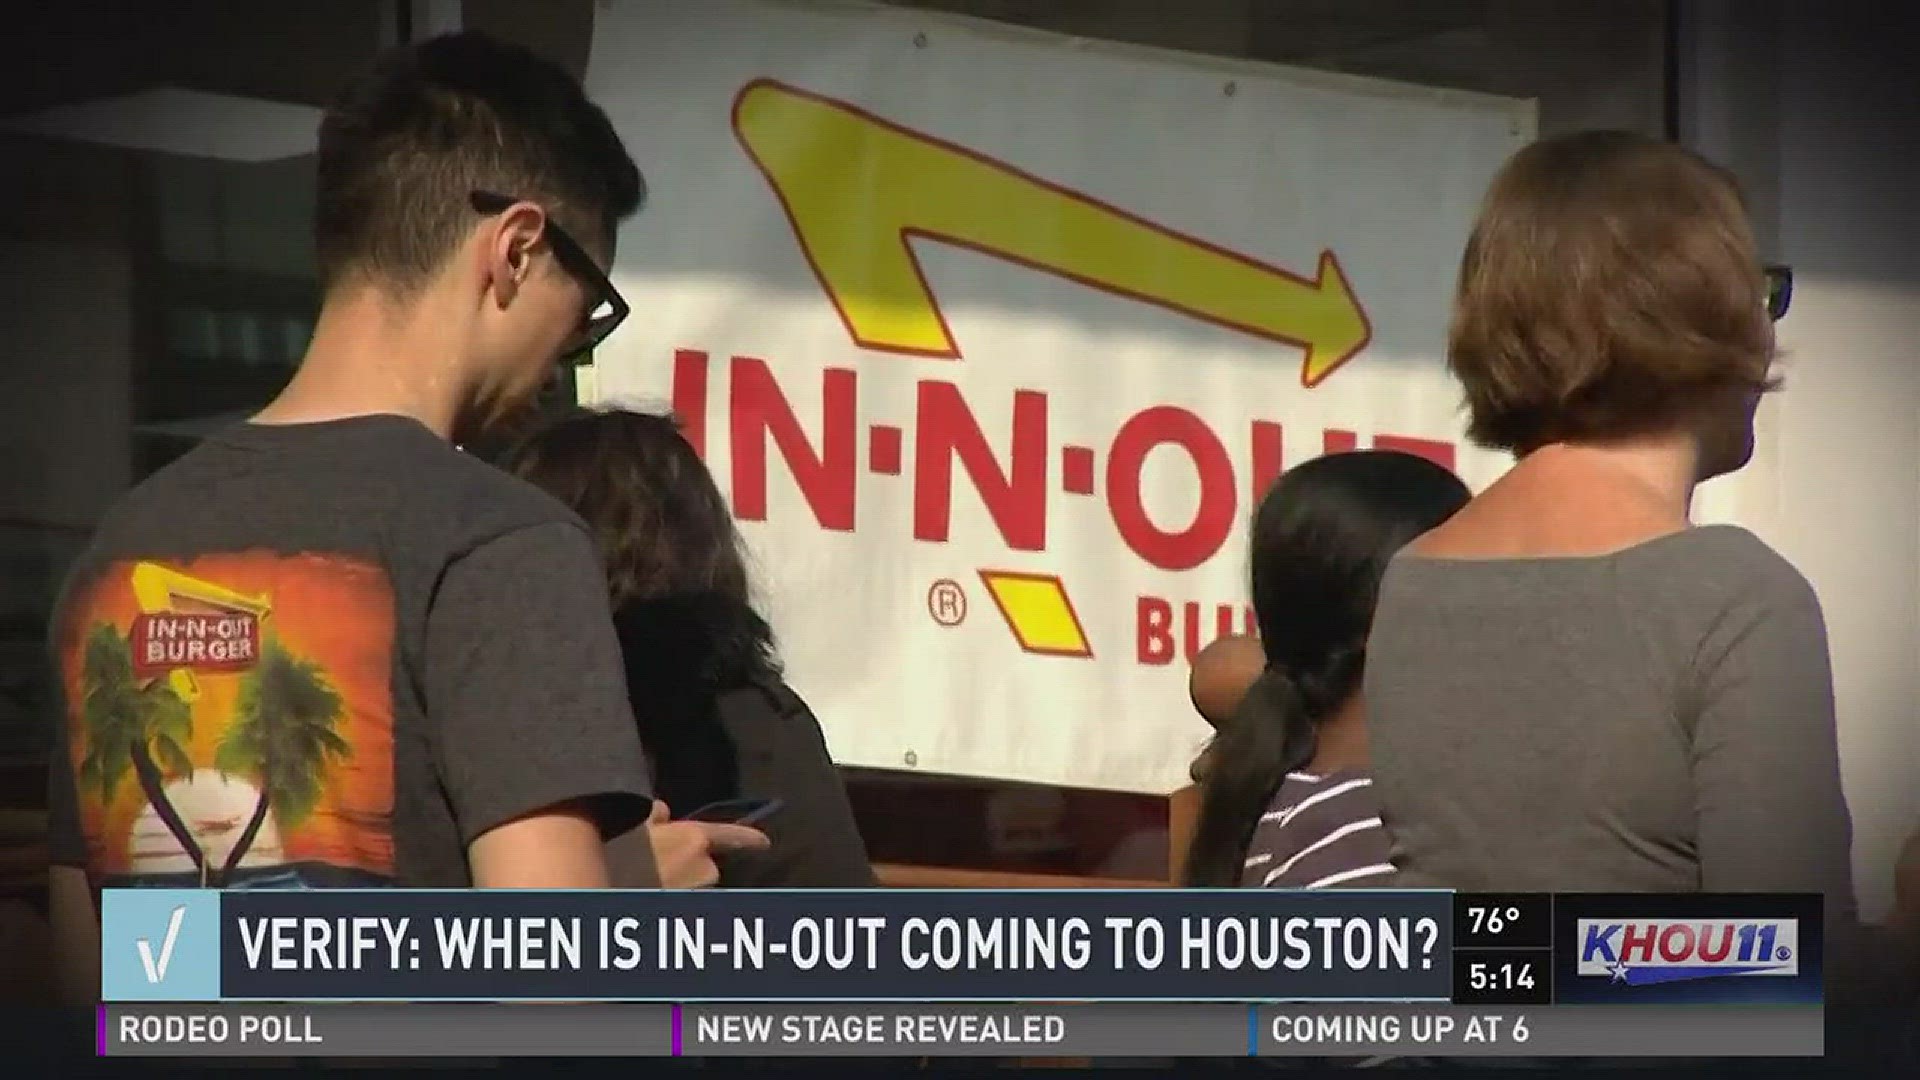 Several months ago have passed since the popular In N Out Burger joint purchased land in Houston so KHOU 11 reporter Janelle Bludau set out to verify when or if a restaurant will be built in the Bayou City.